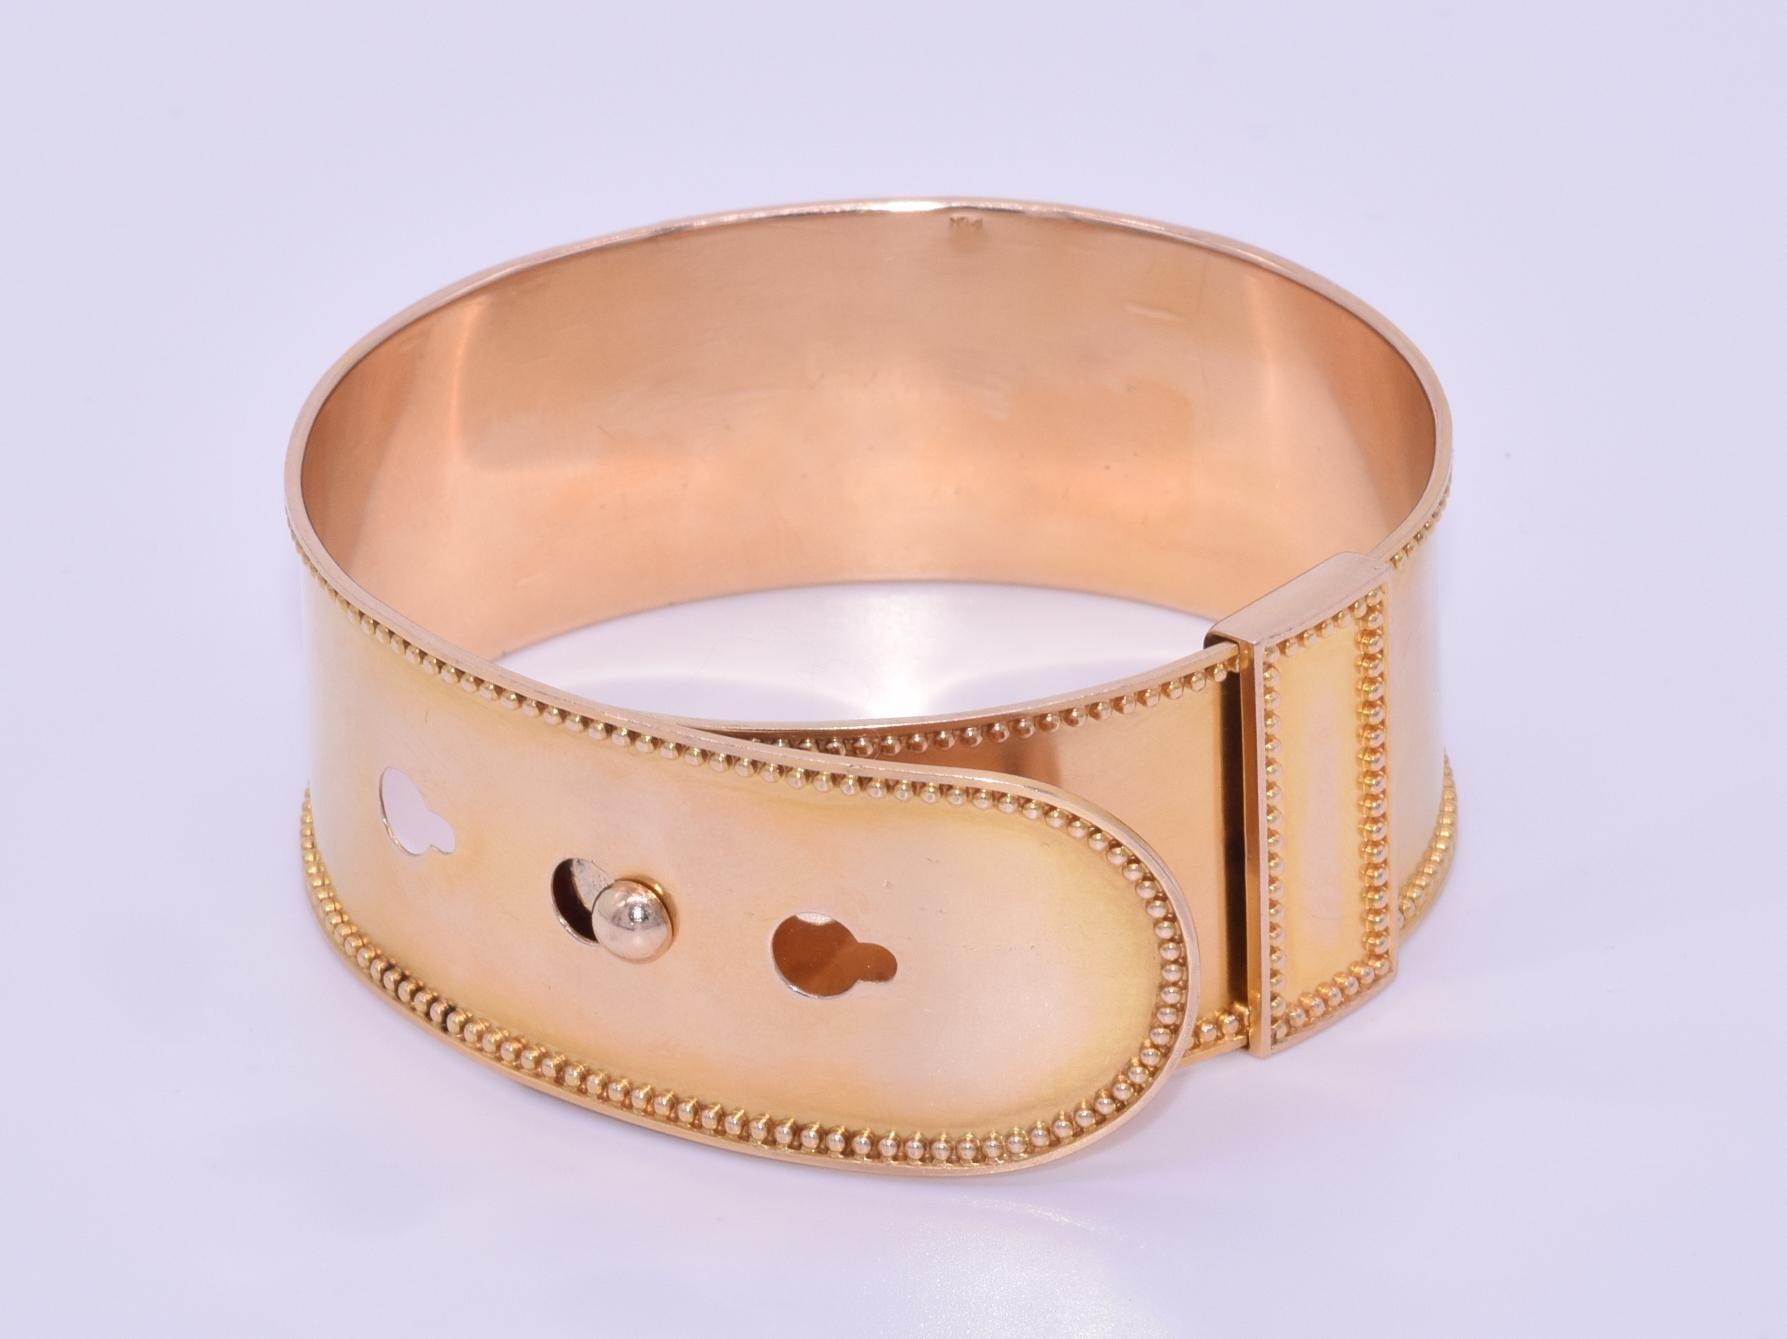 Victorian 14 Karat Yellow Gold Buckle Adjustable Bangle Bracelet, circa 1880s

An adjustable bangle with gold beadwork border detail is formed of 14 karat yellow spring gold with a sliding bar fastener and 3 sizing options. The cuff measures